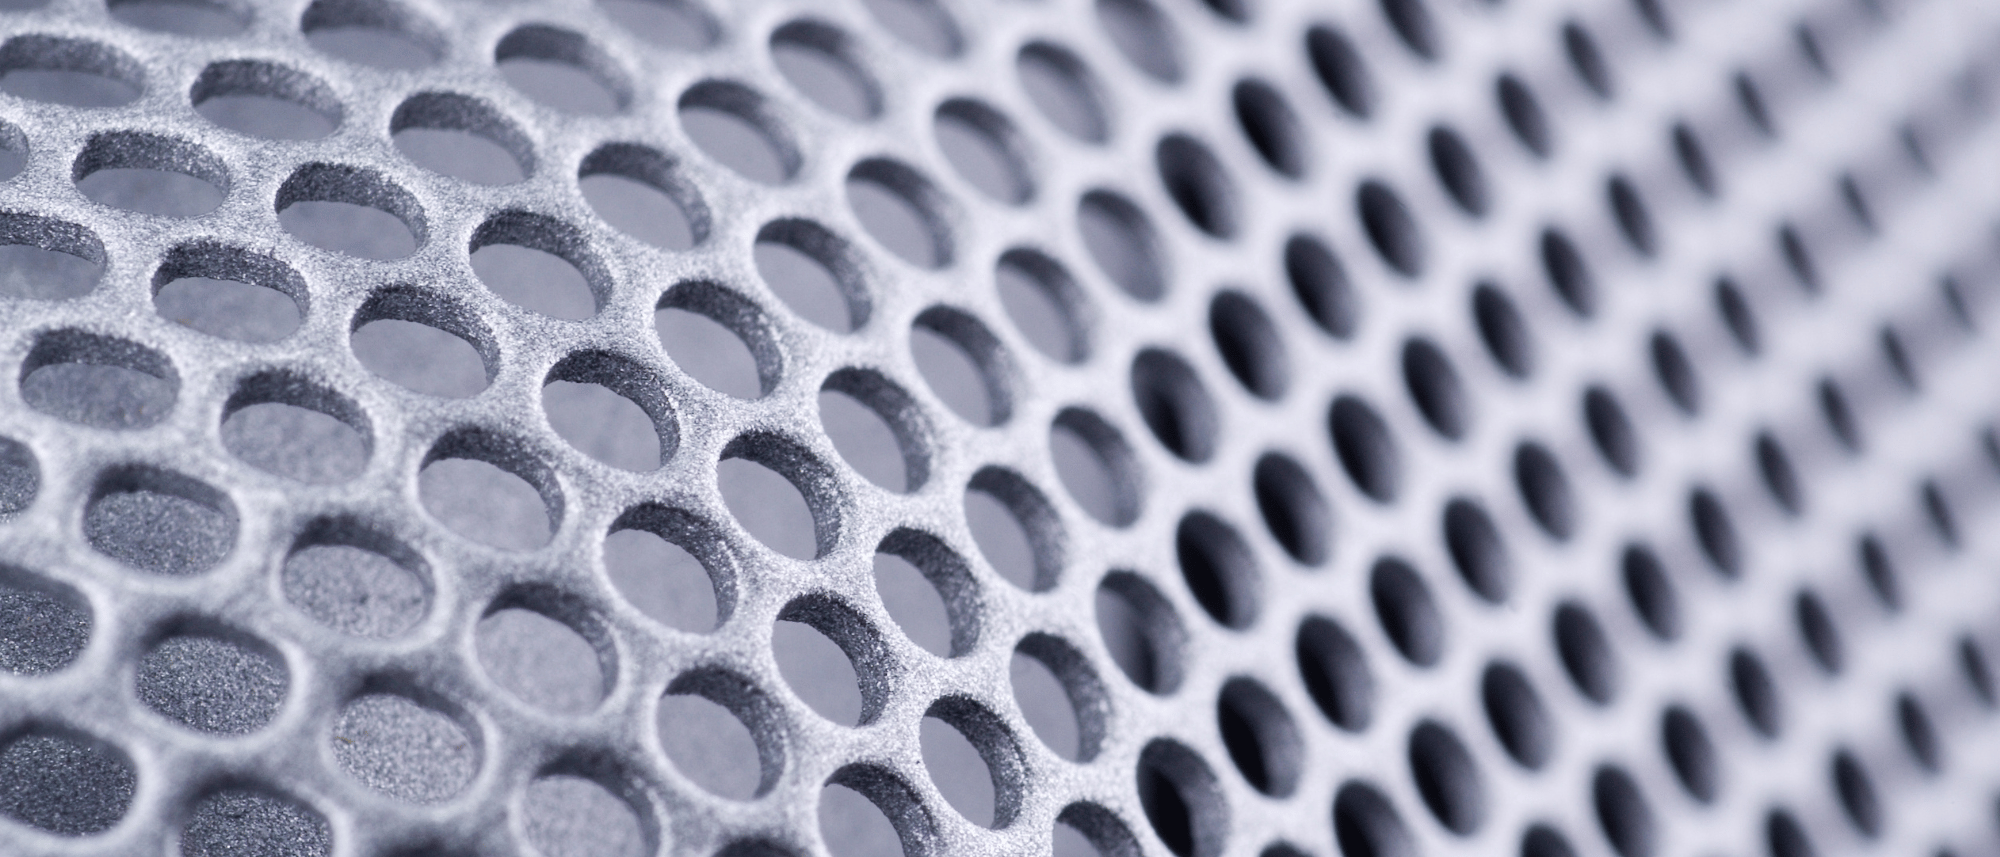 Architectural Applications of Perforated Metal Panels